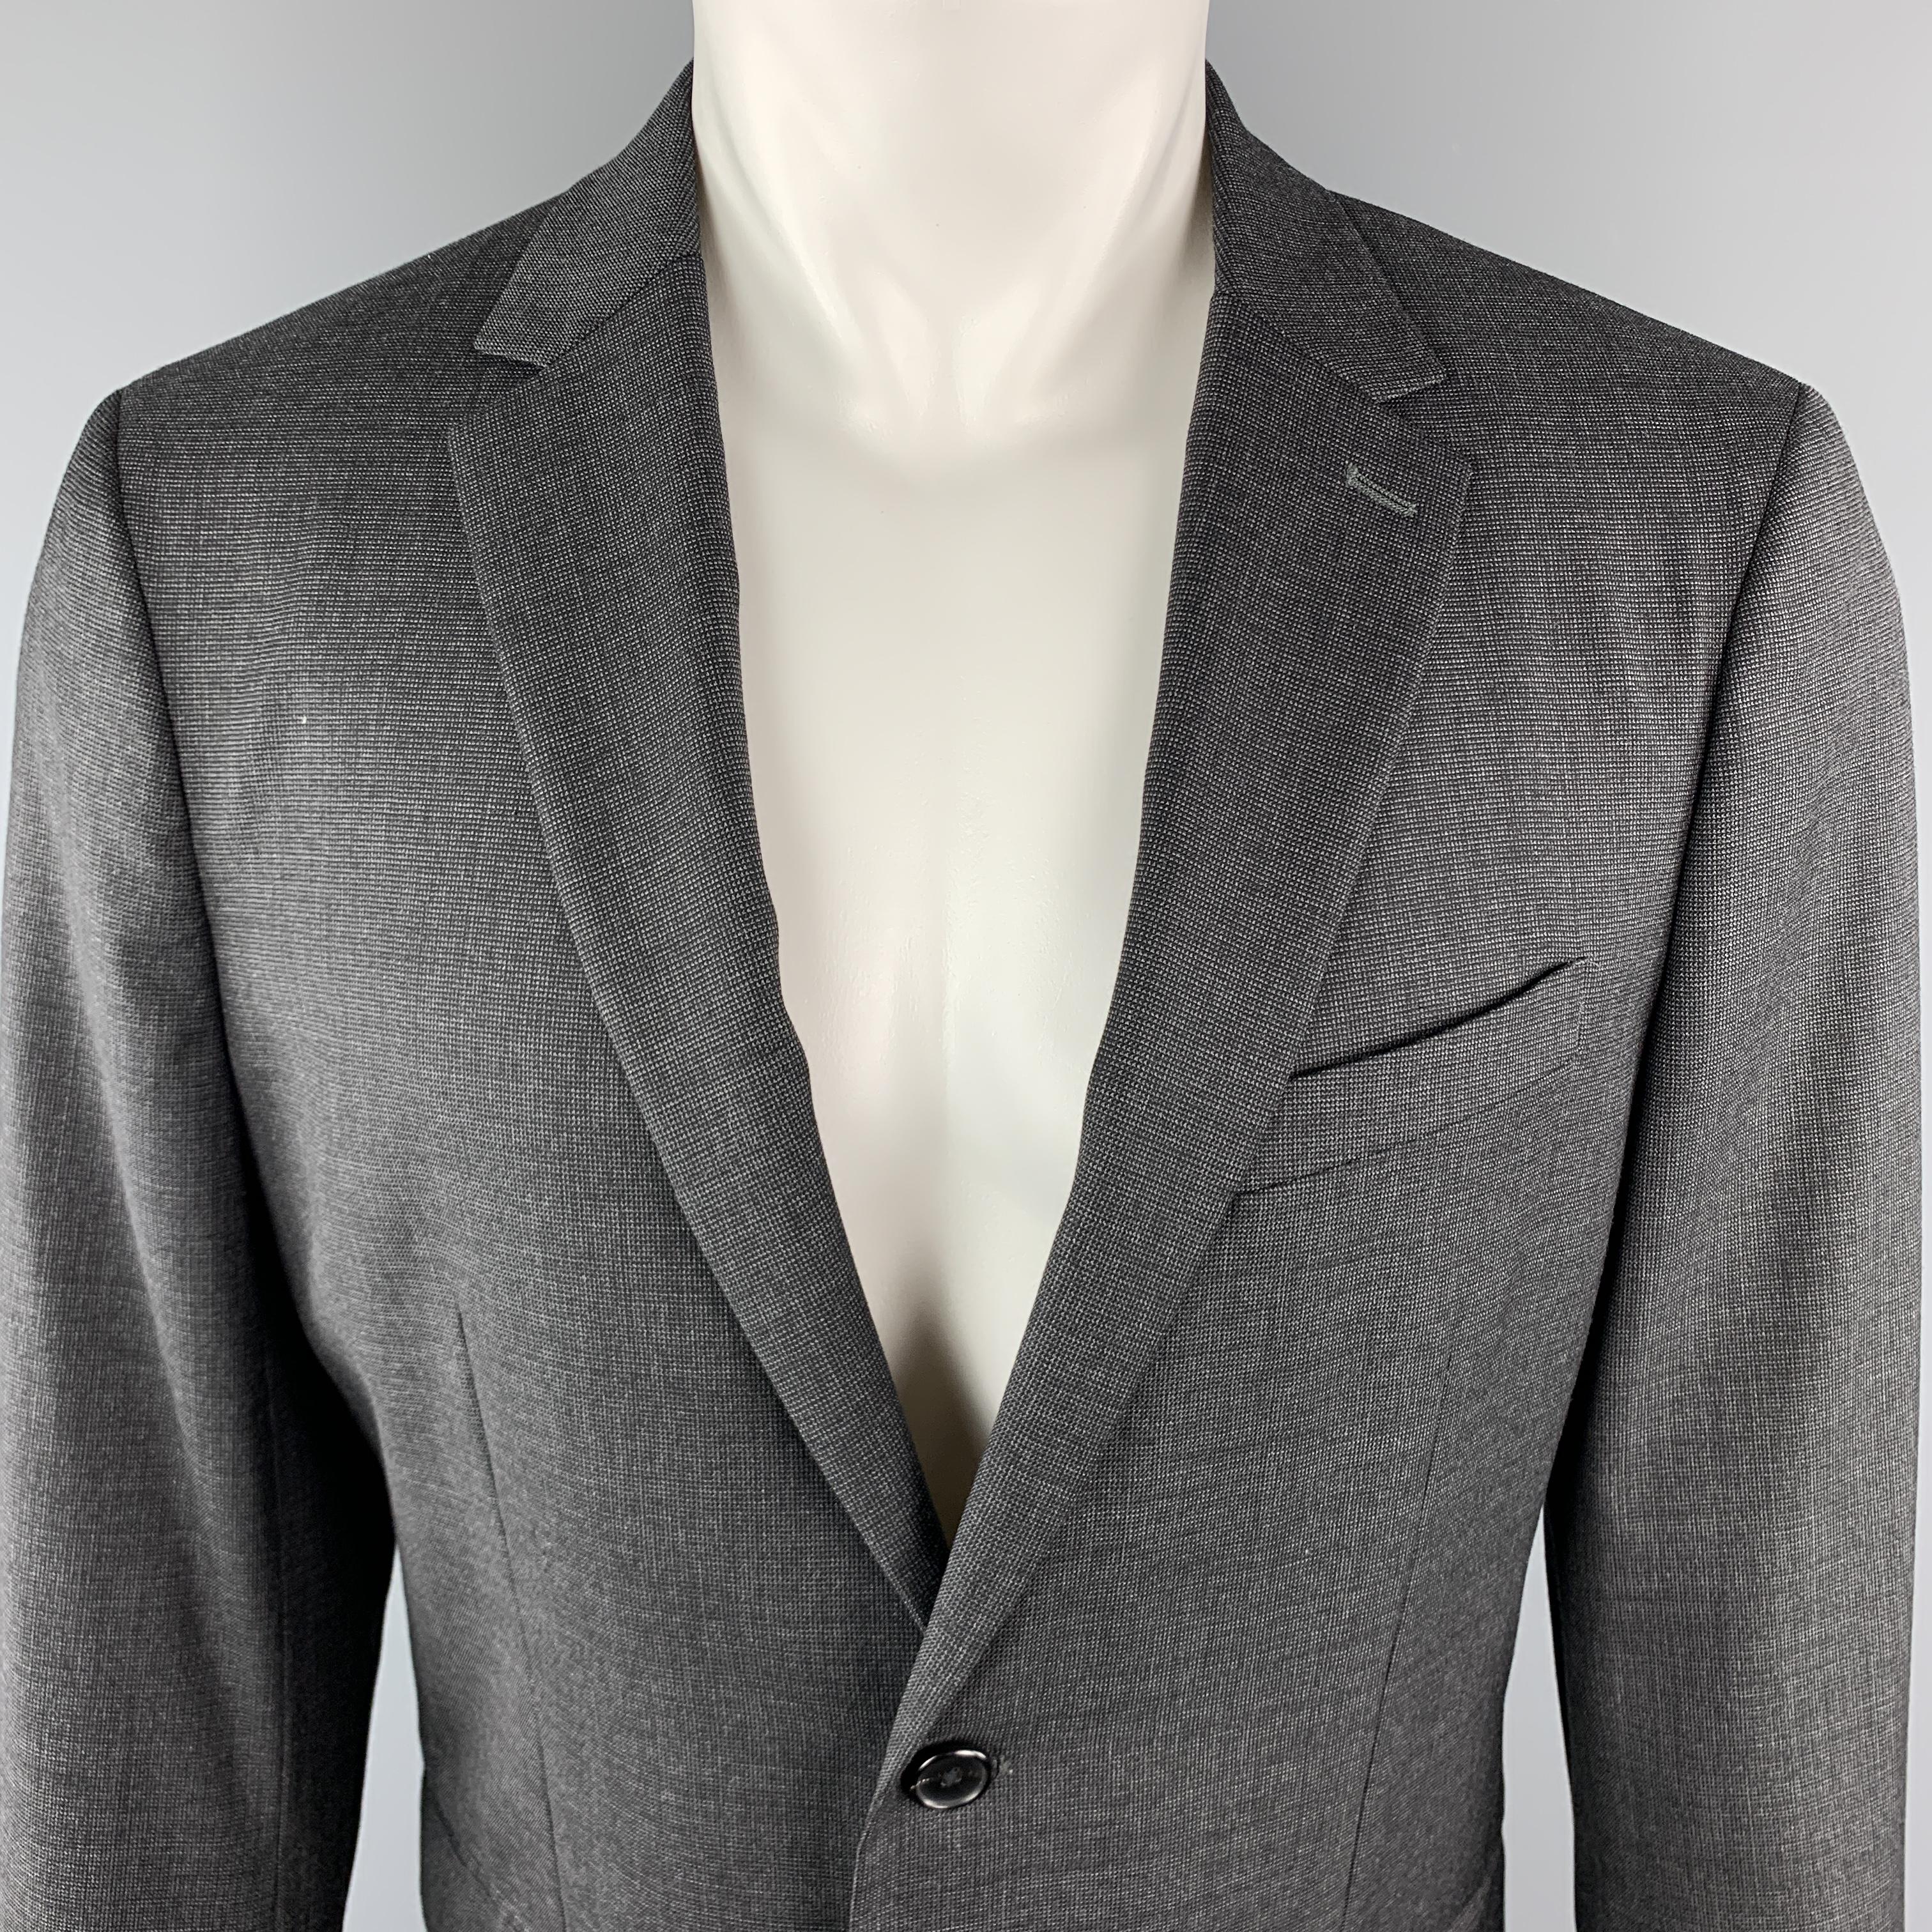 THEORY Sport Coat comes in a charcoal tone in a nailhead wool material, with a notch lapel, slit and flap pockets, two buttons at closure, single breasted, buttoned cuffs, and a single vent at back.

Excellent Pre-Owned Condition.
Marked: 40